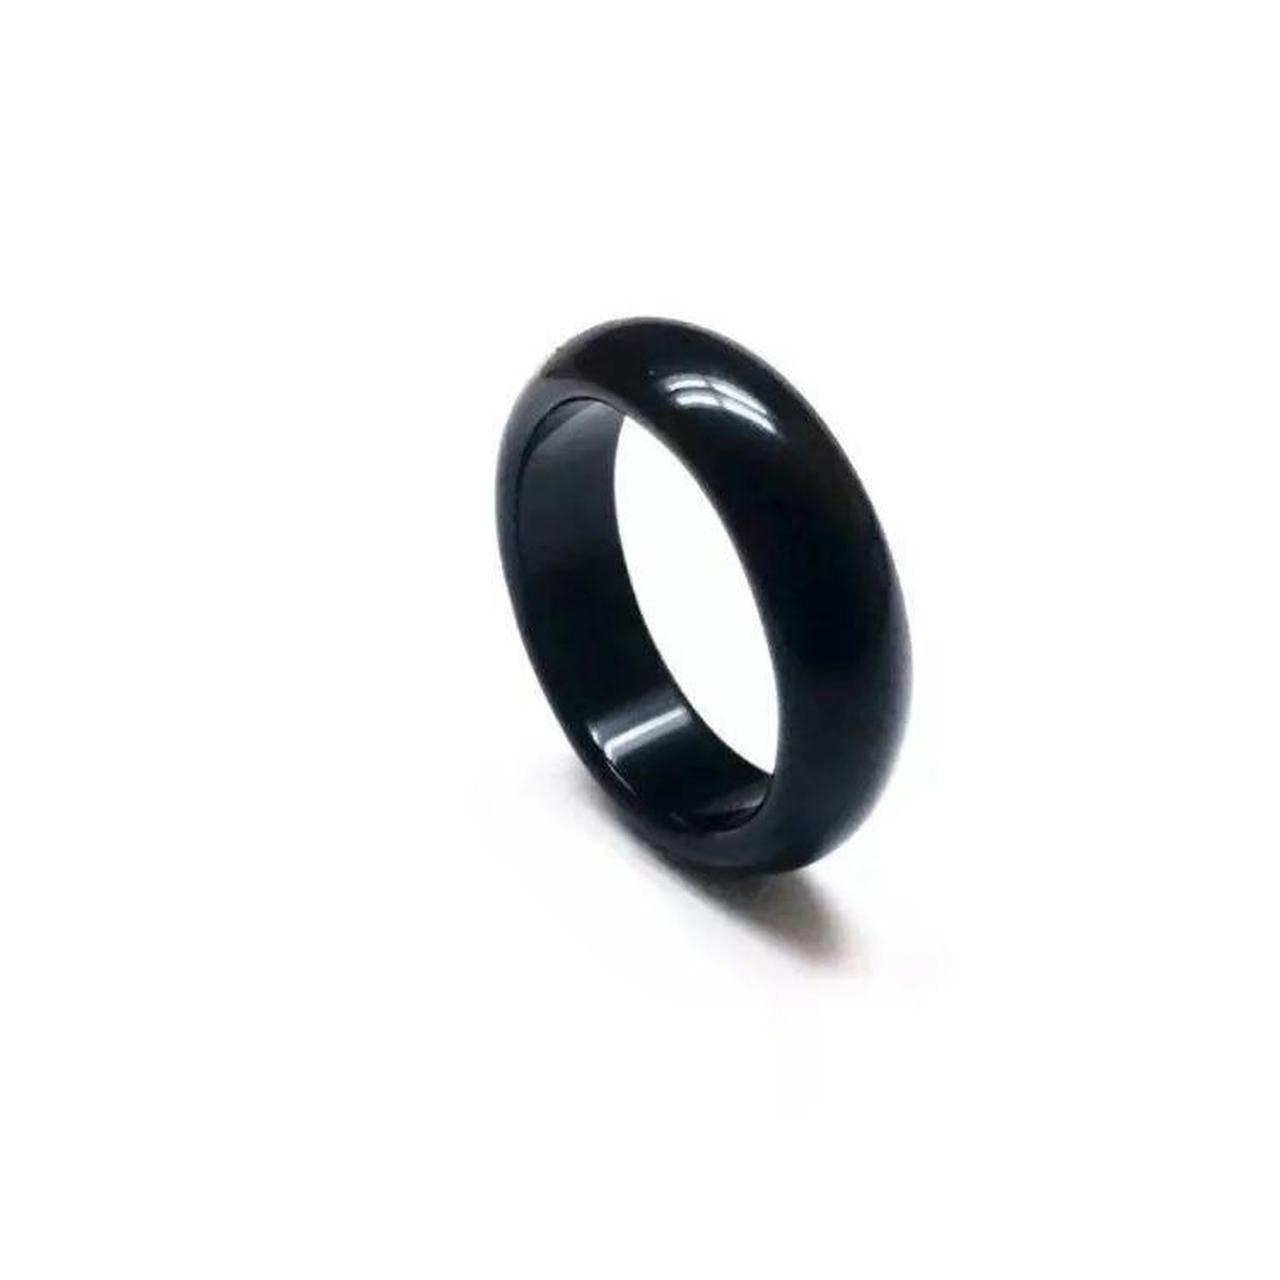 Product Image 3 - Black obsidian ring size 6
condition: